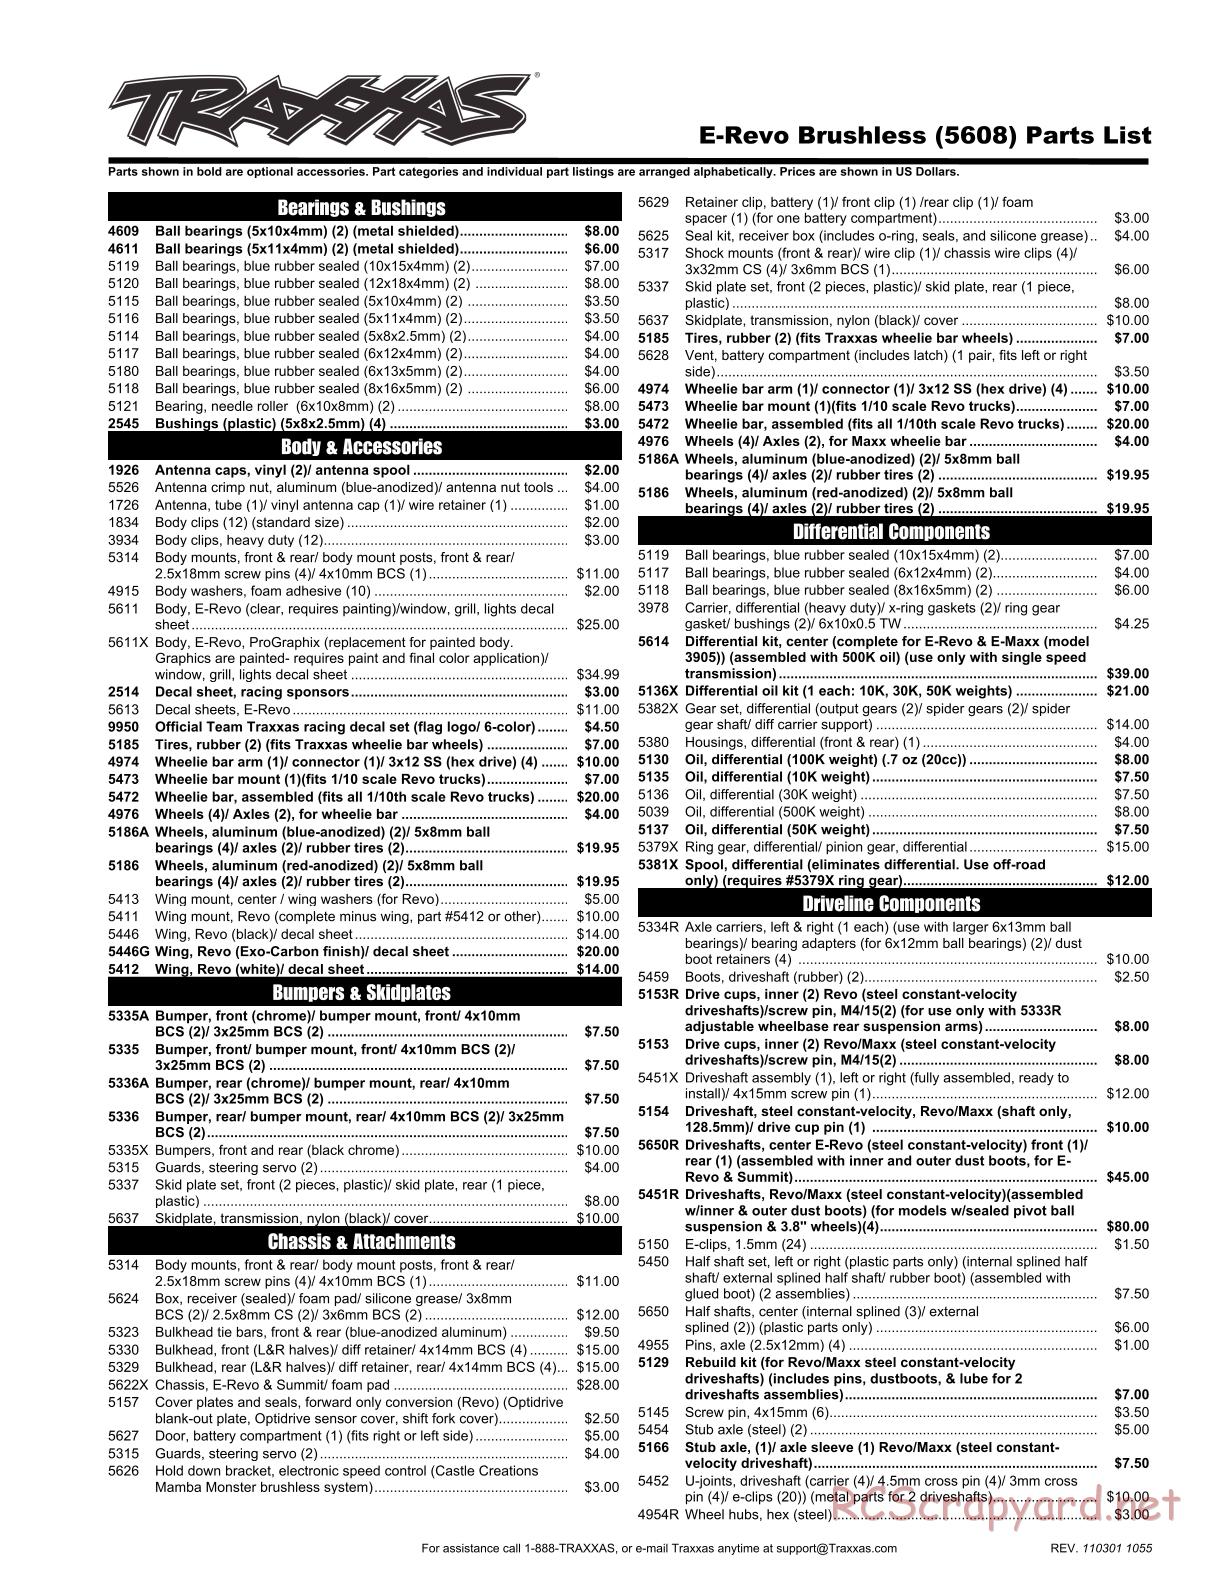 Traxxas - E-Revo Brushless (2009) - Parts List - Page 1